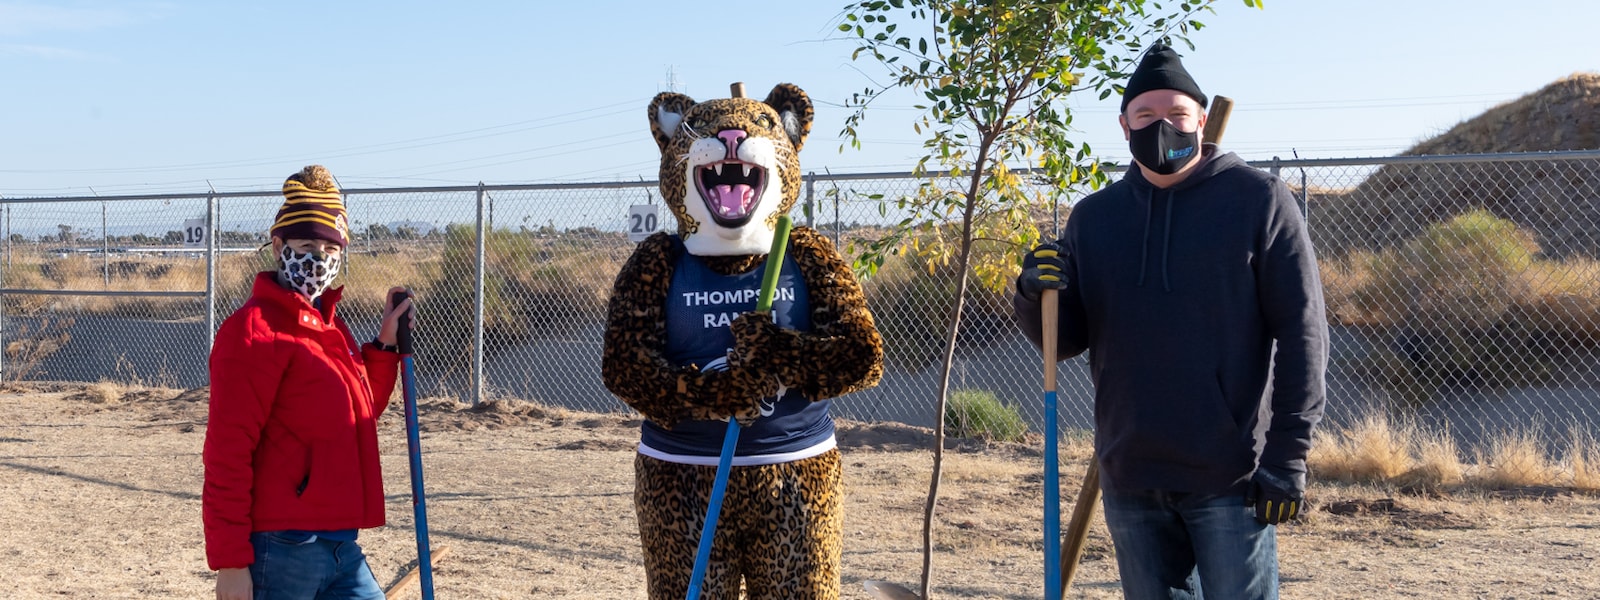 The principal of Thompson Ranch, Dr. Kellis, and the mascot pose while planting trees.